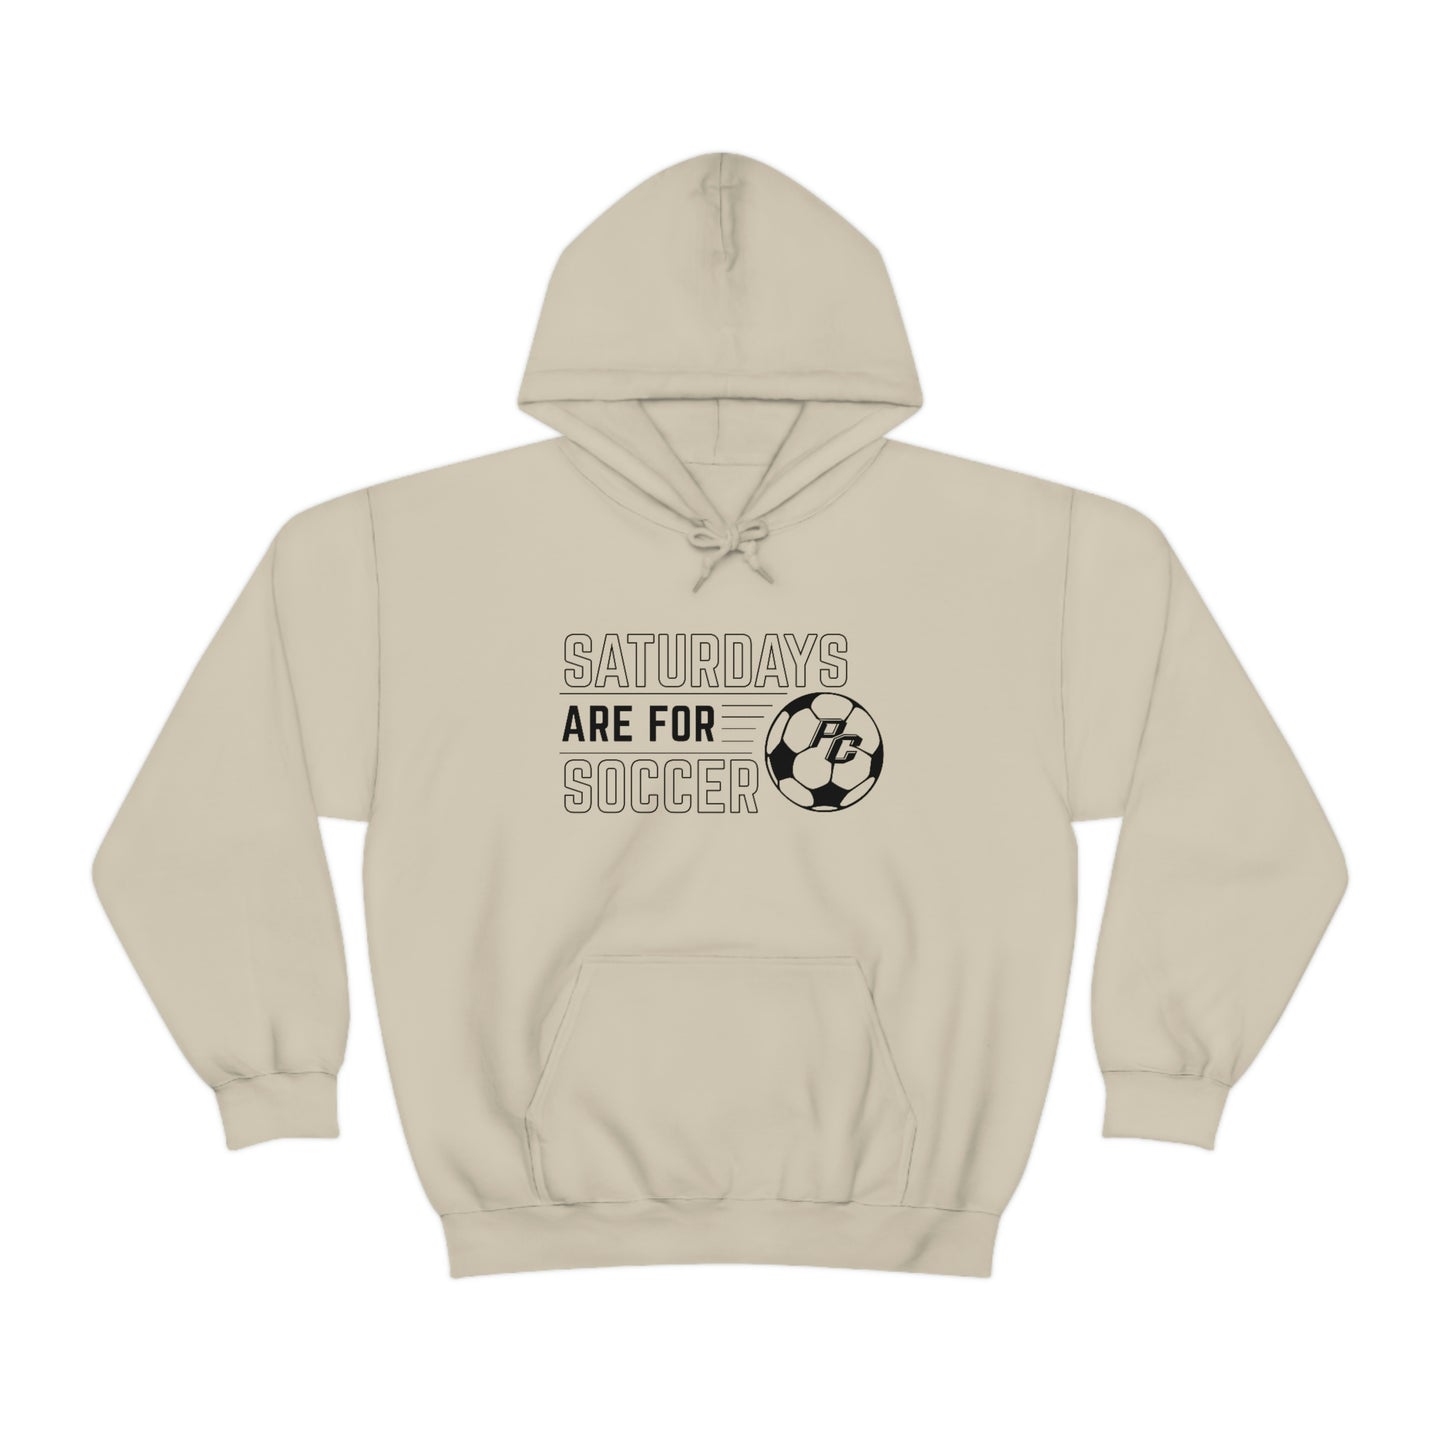 Saturdays Are For Soccer - Hoodie (Sand)